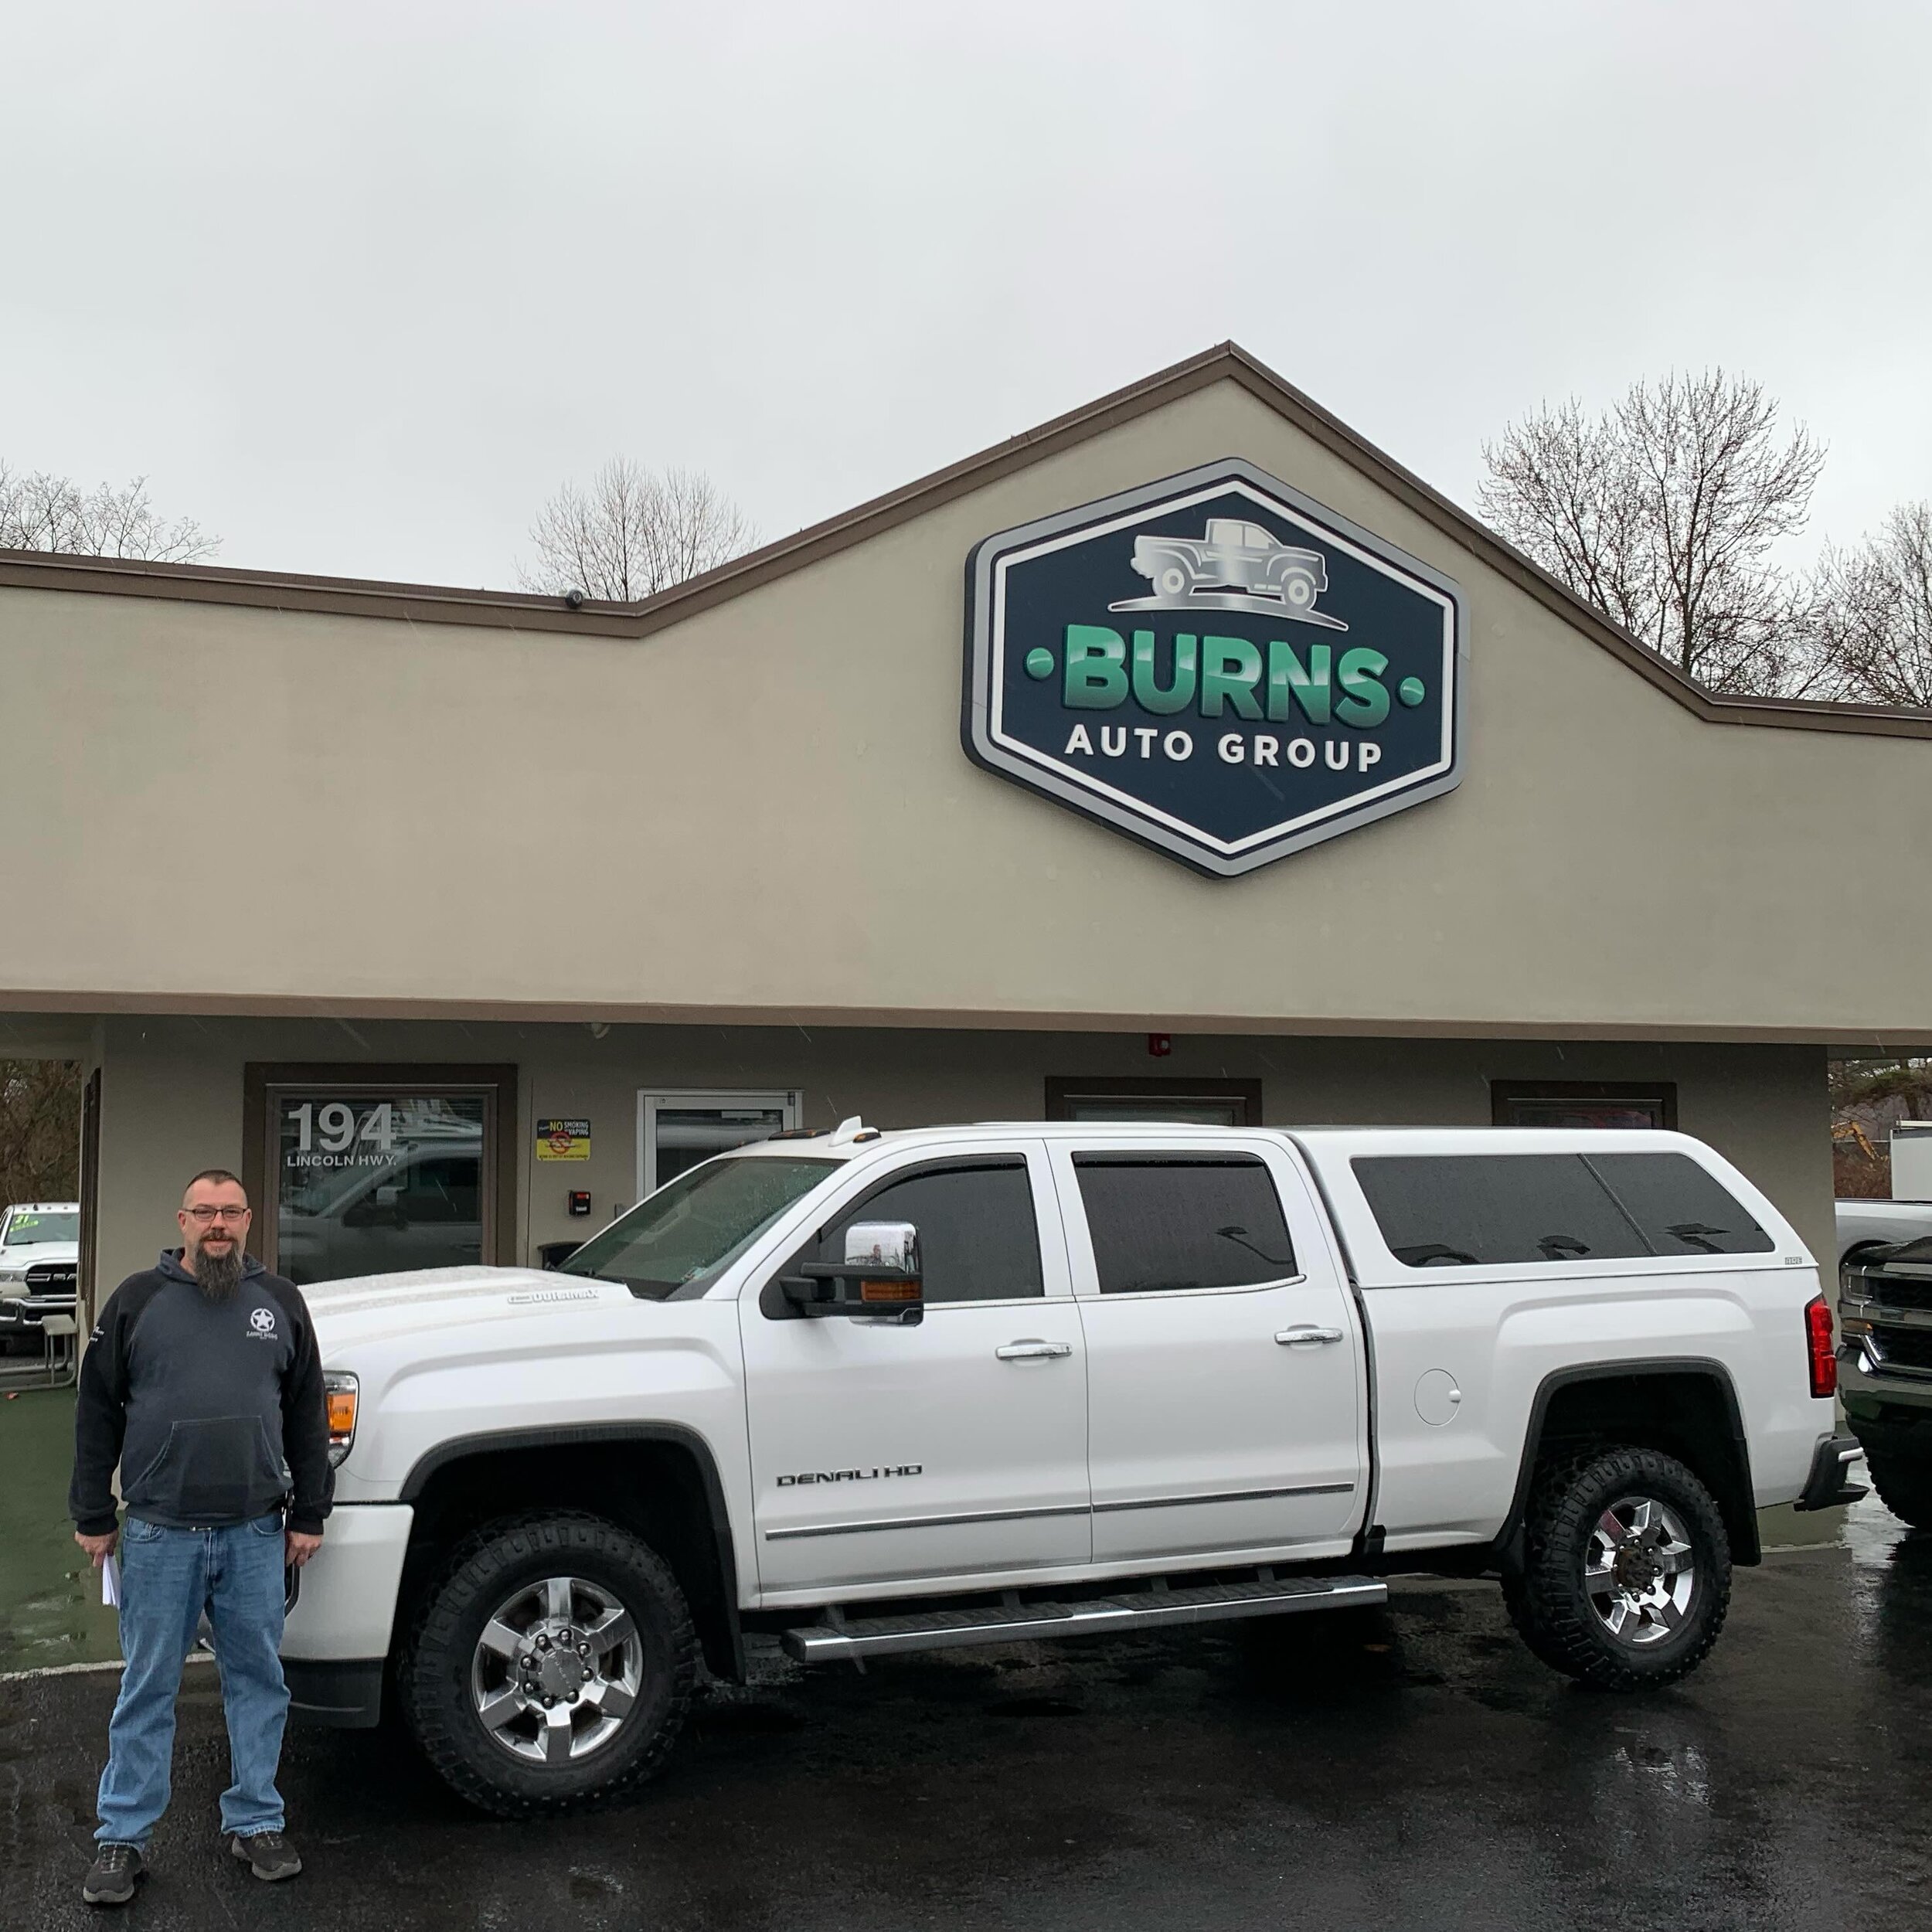 Anthony traveled up from Delaware today to pick up his 2019 GMC Sierra 3500HD Denali Diesel! Congrats on the truck, thanks for choosing Burns Auto Group